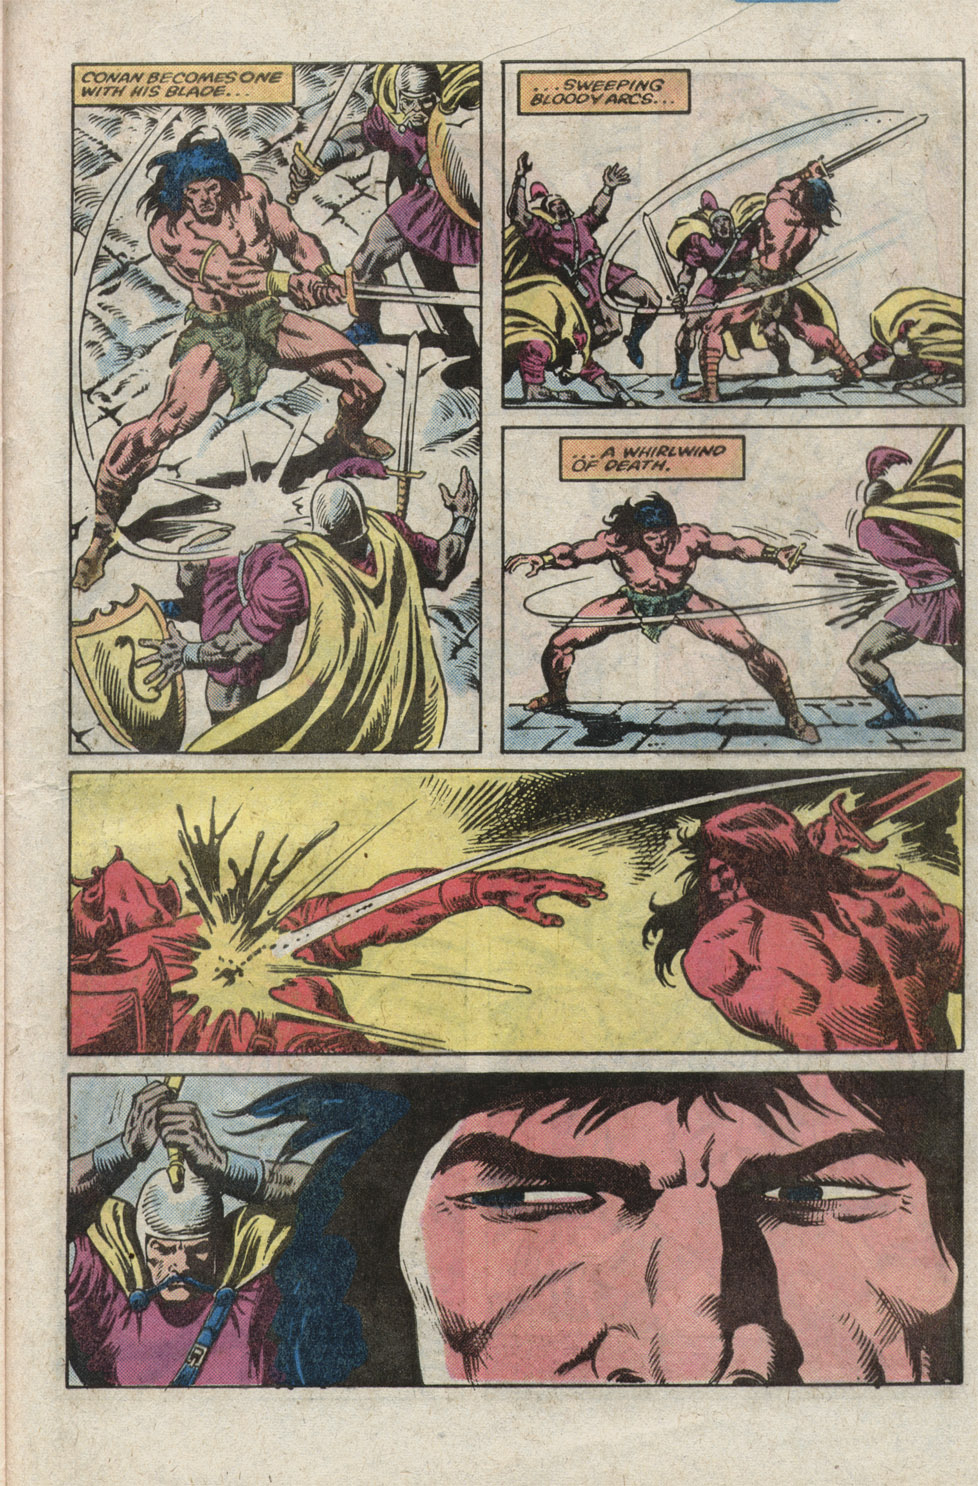 What If? (1977) issue 39 - Thor battled conan - Page 33